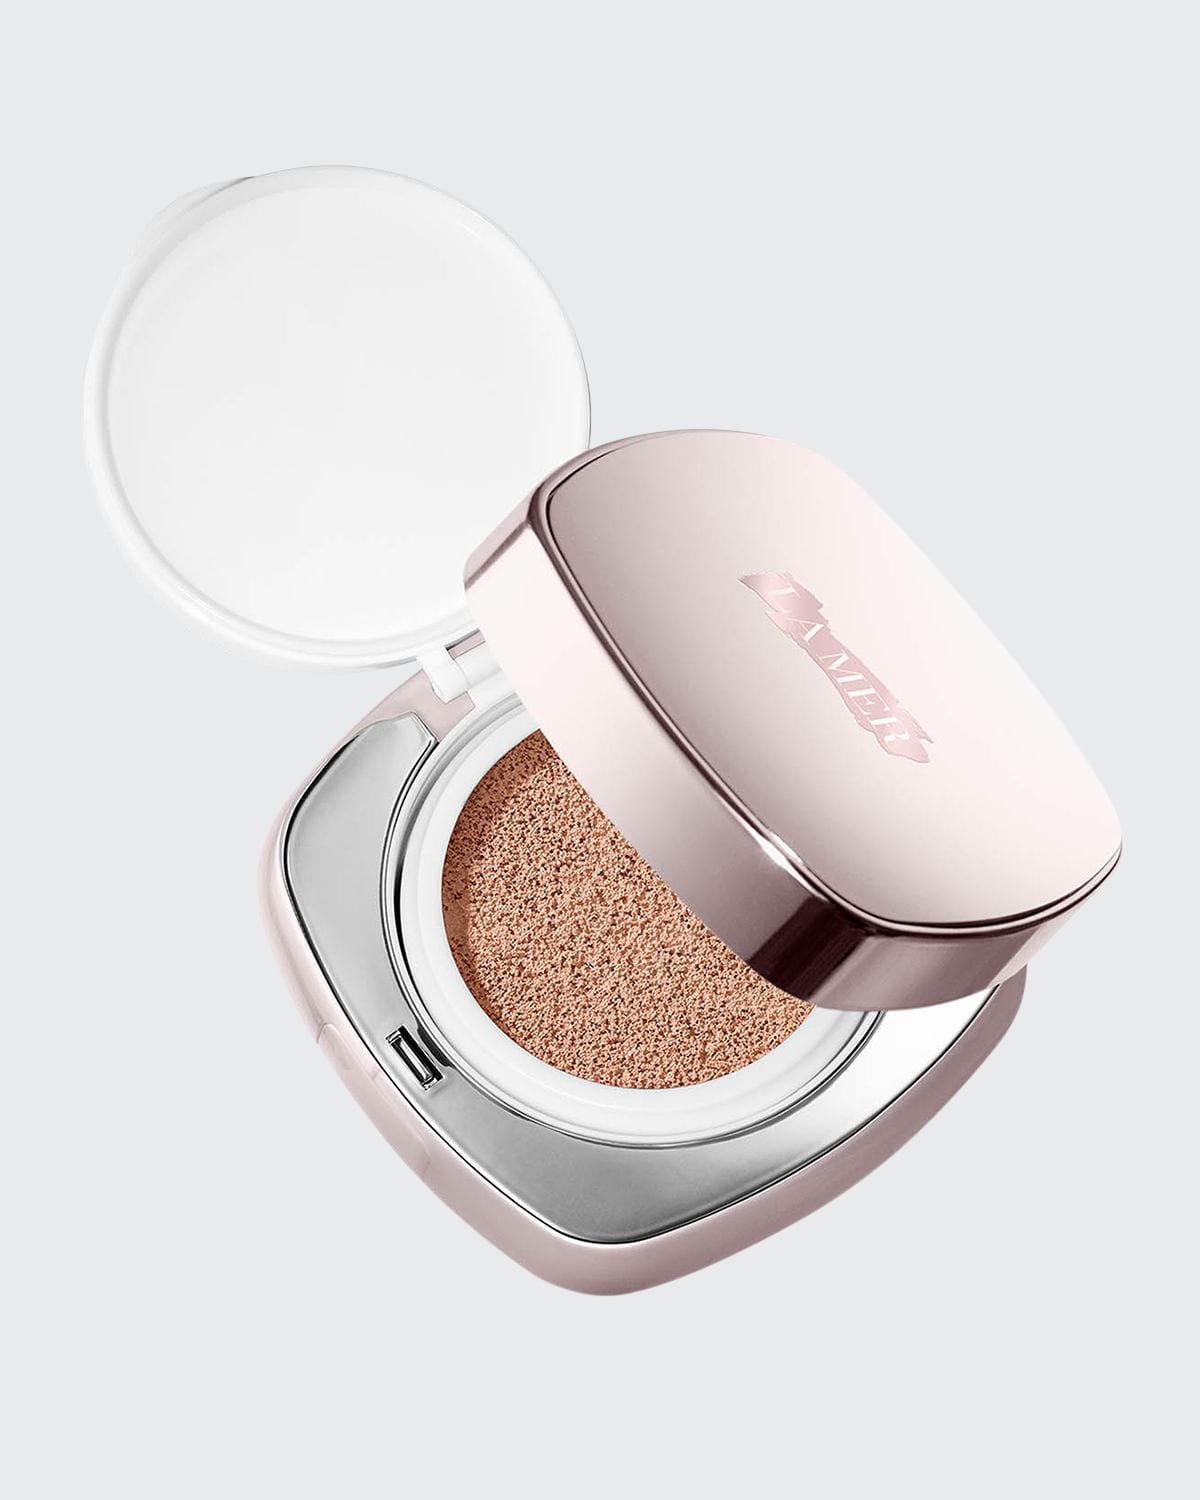 La Mer The Luminous Lifting Cushion Foundation Broad Spectrum Spf 20 In 11 Rosy Ivory